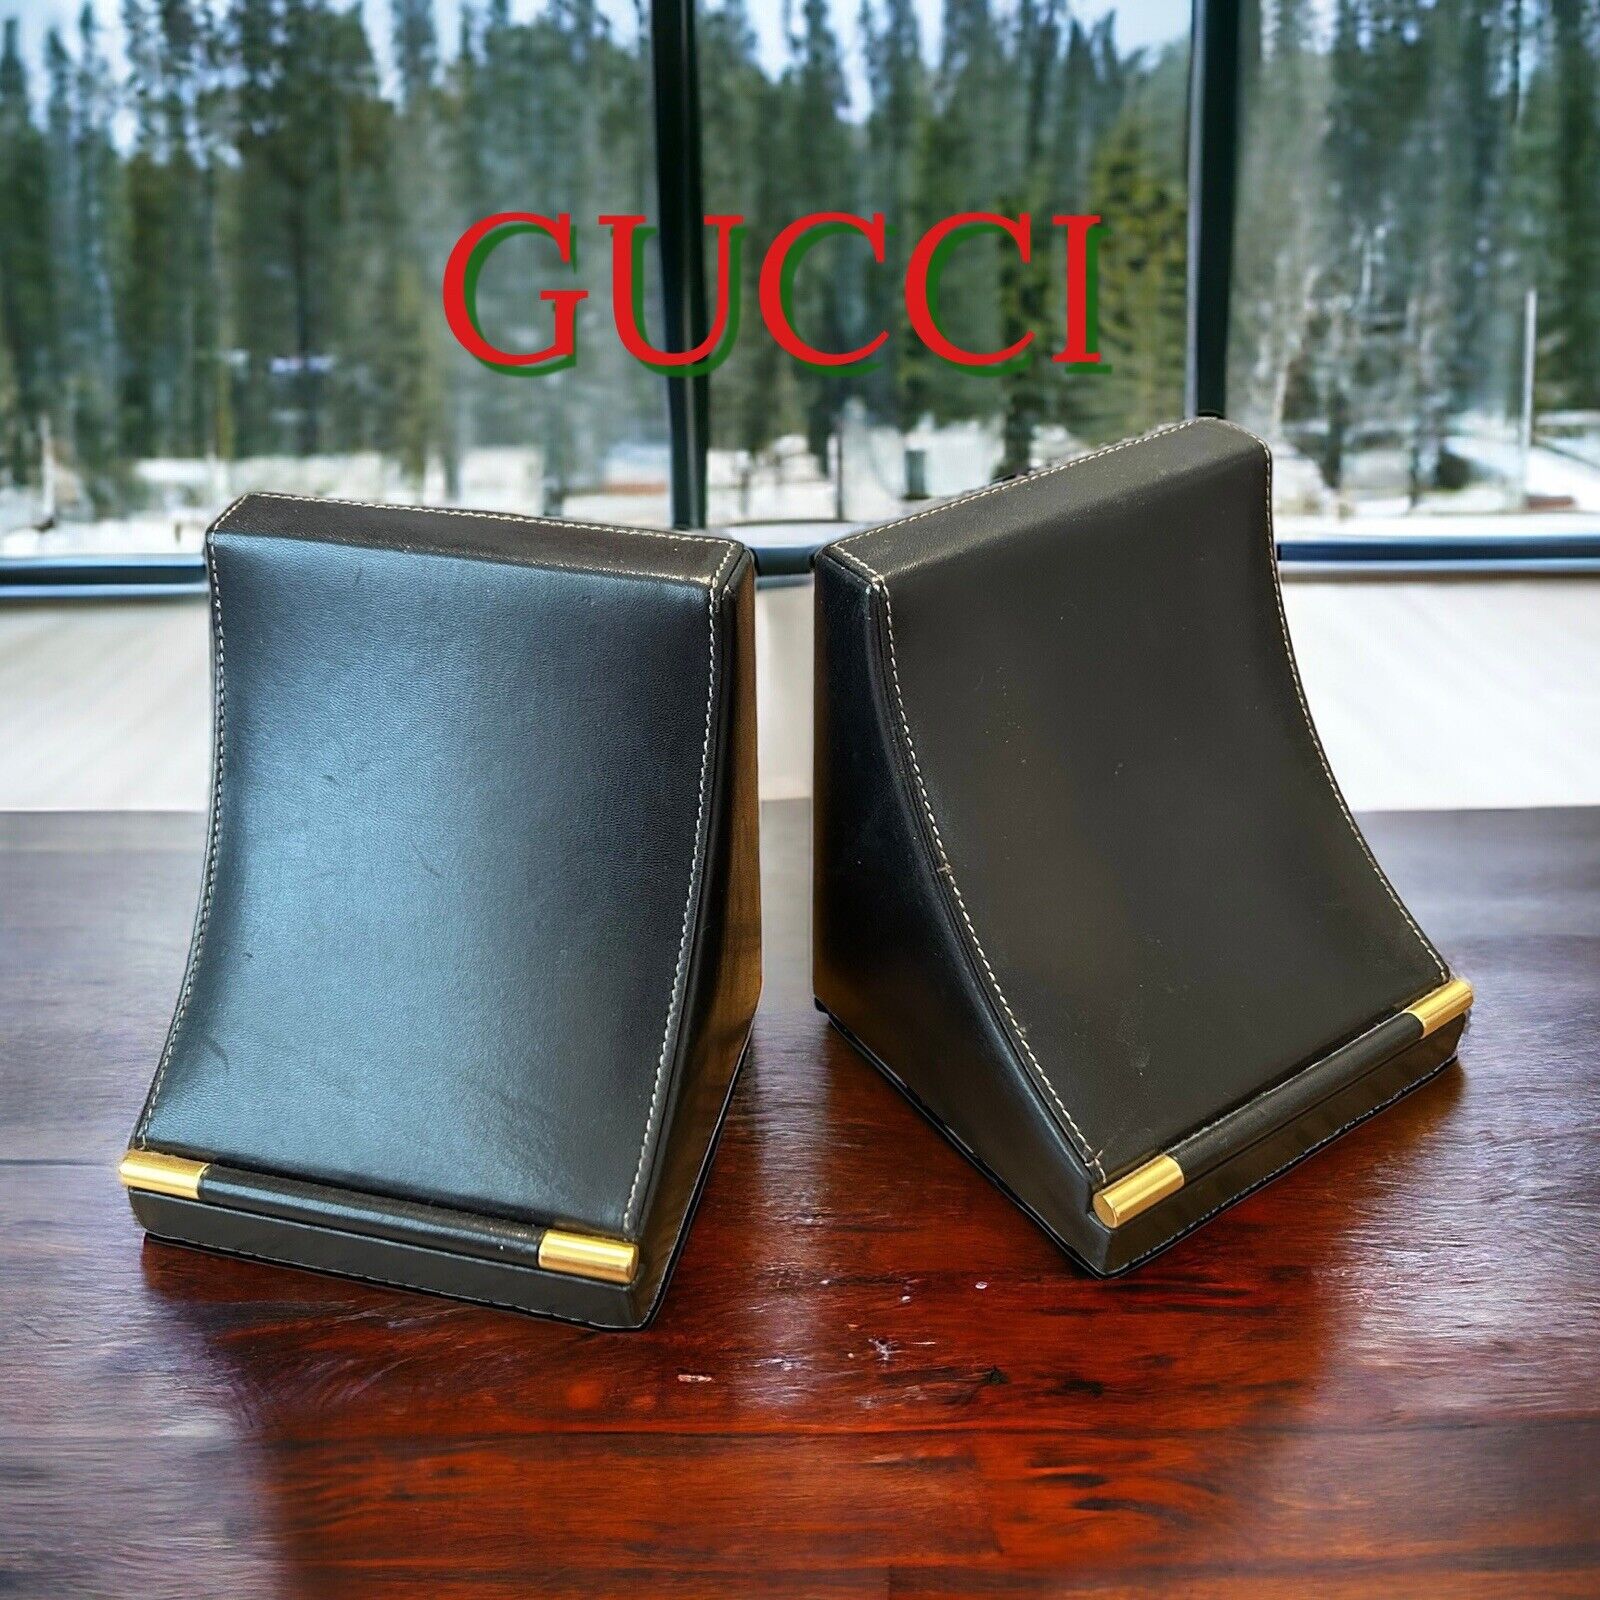 Vtg GUCCI Pair of Black Leather Bookends Designer Office Decor